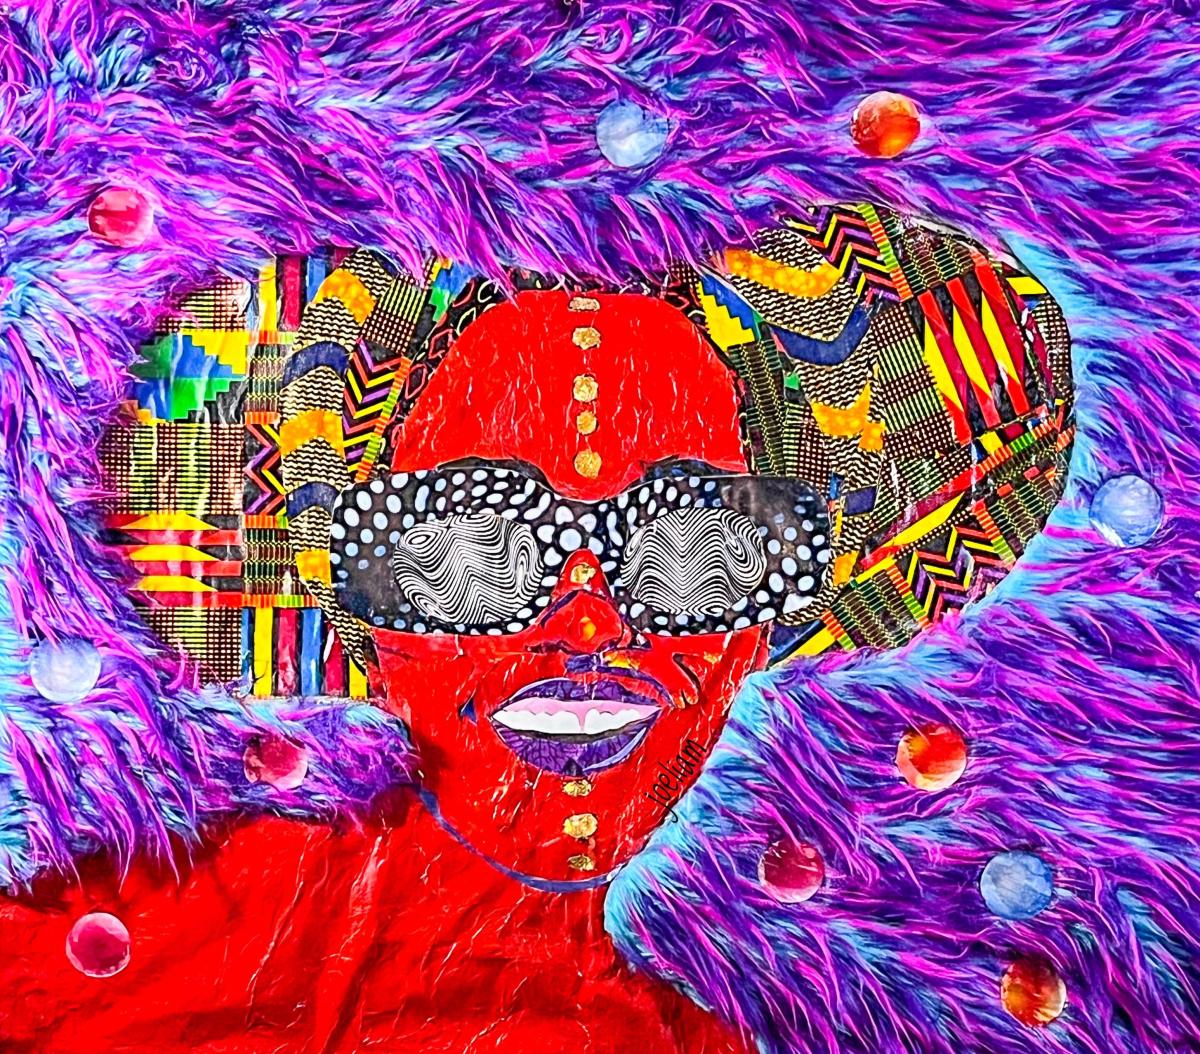 A neon-colored abstract collage of a woman with colorful patterns and background